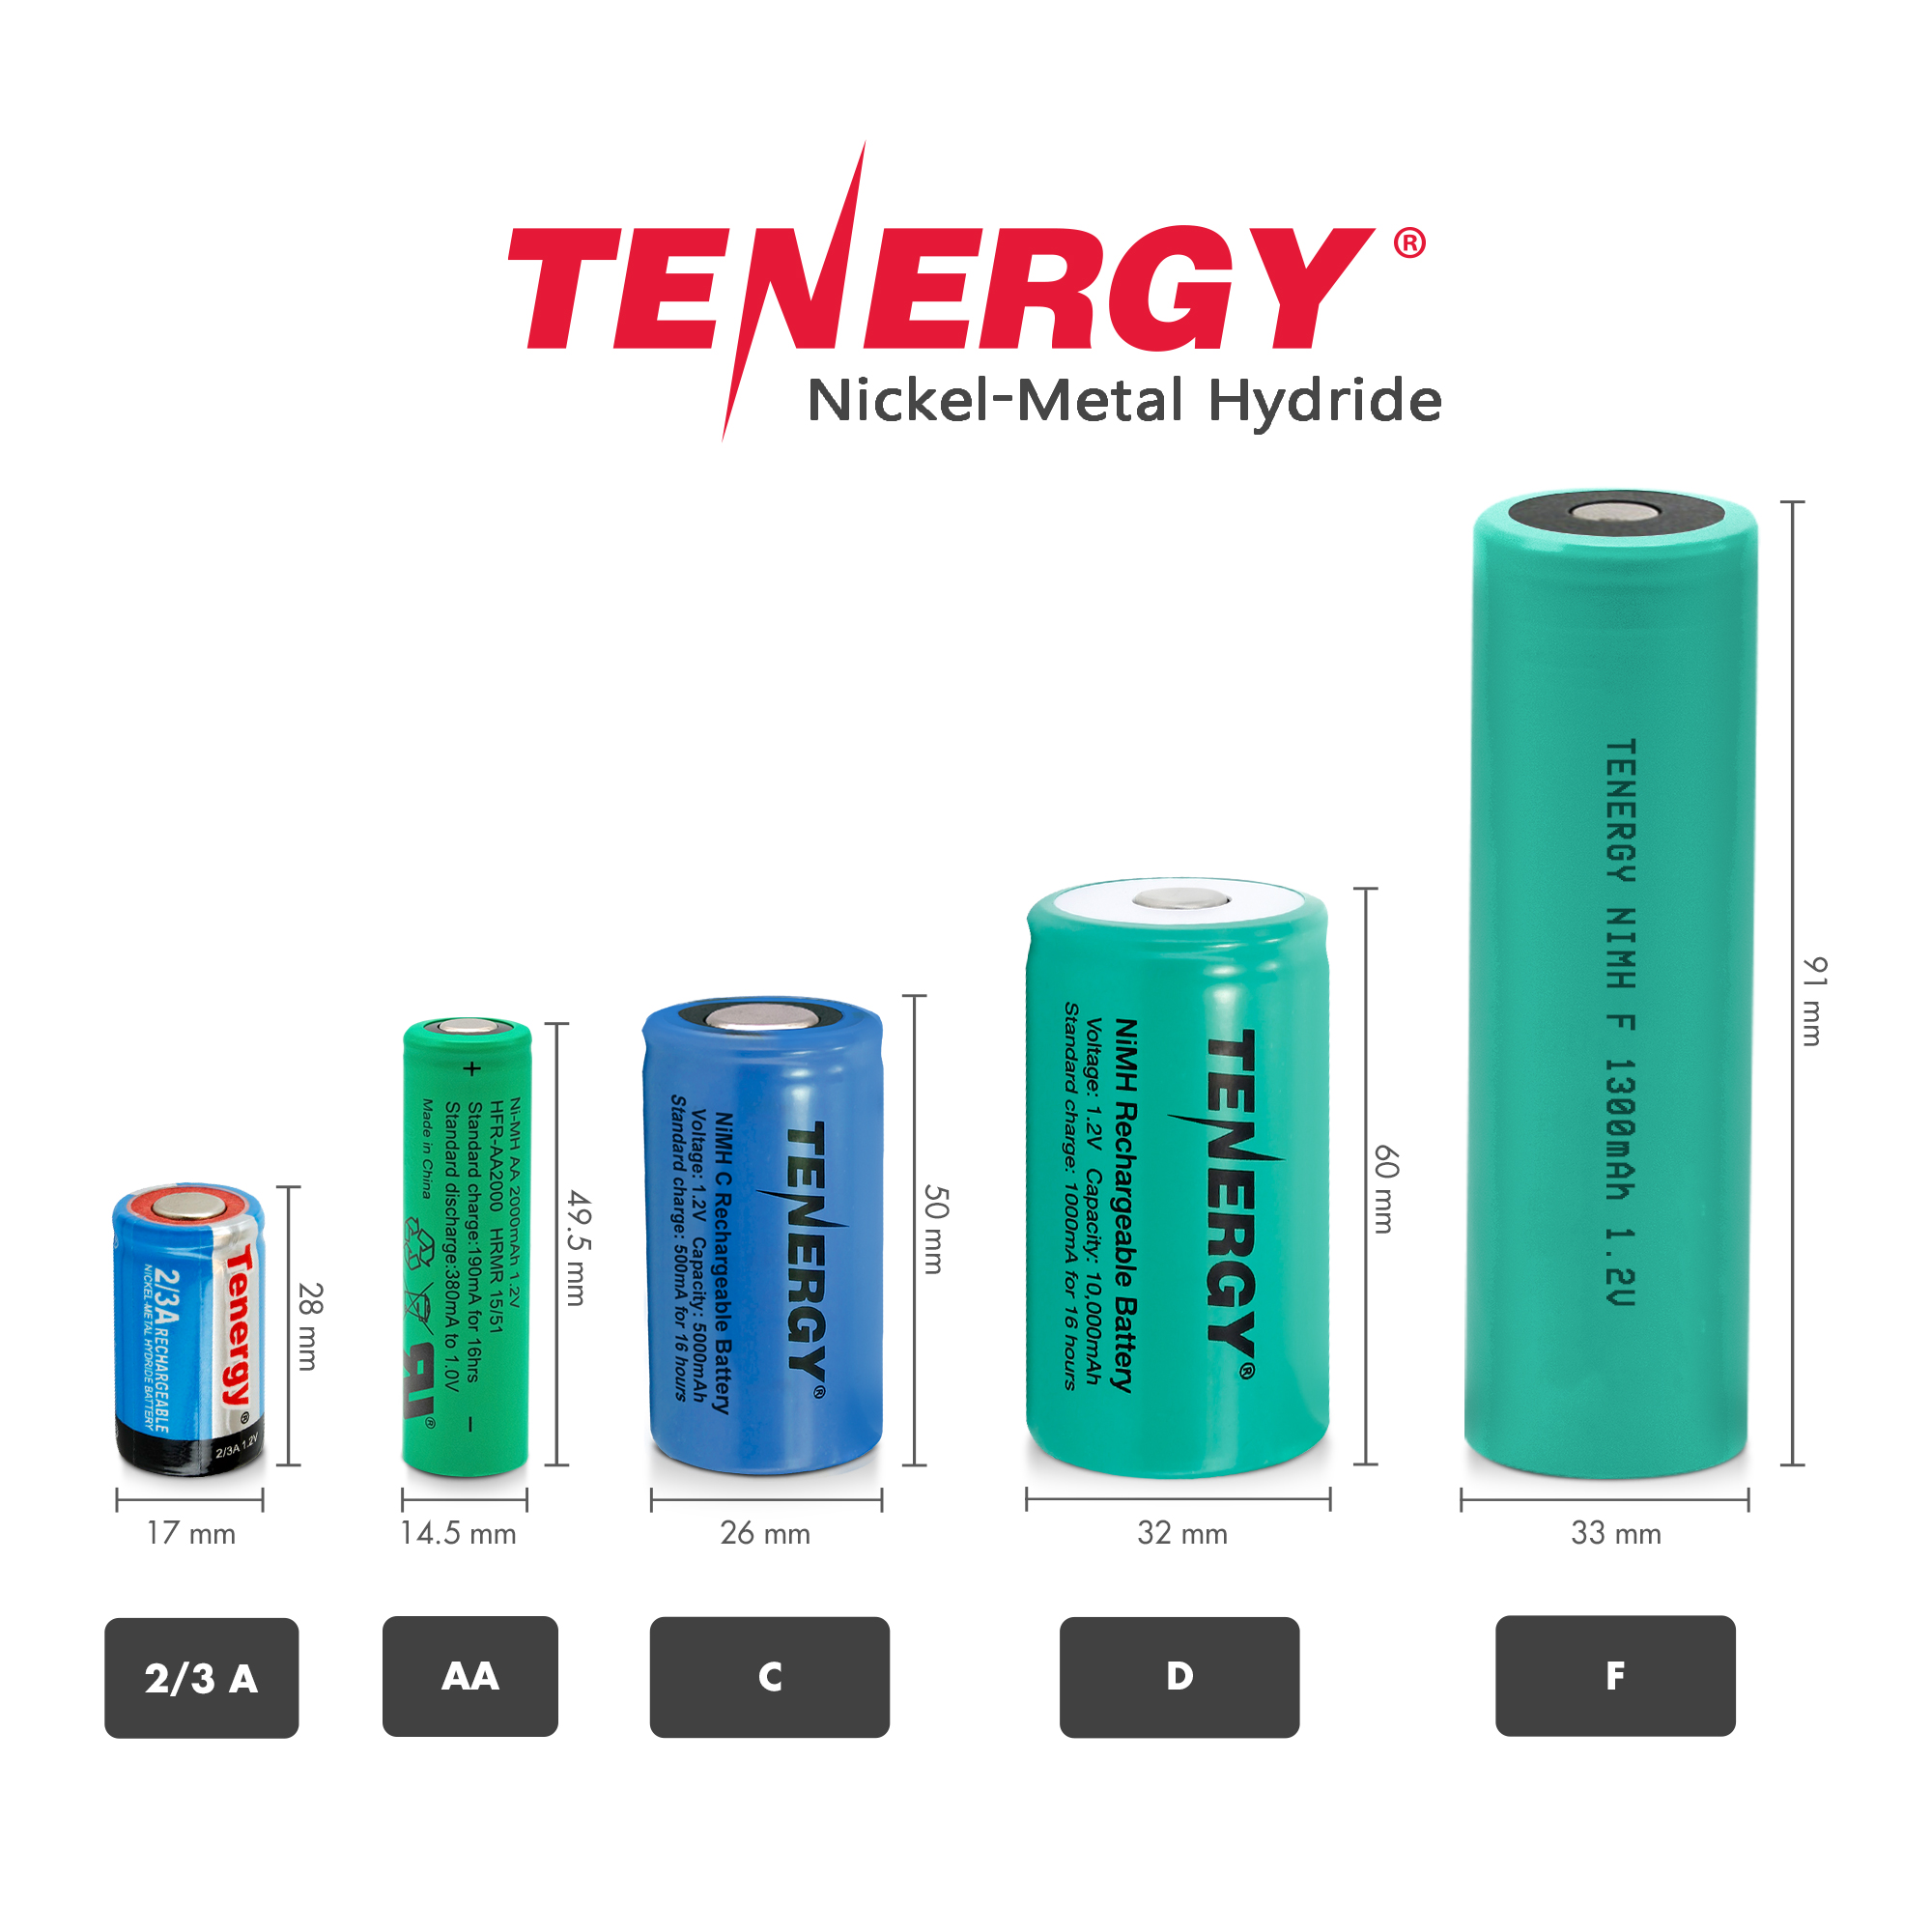 Tenergy 2/3A AA C D F NiMH 1.2V Battery Sizes Flat Top With or Without Tabs  LOT